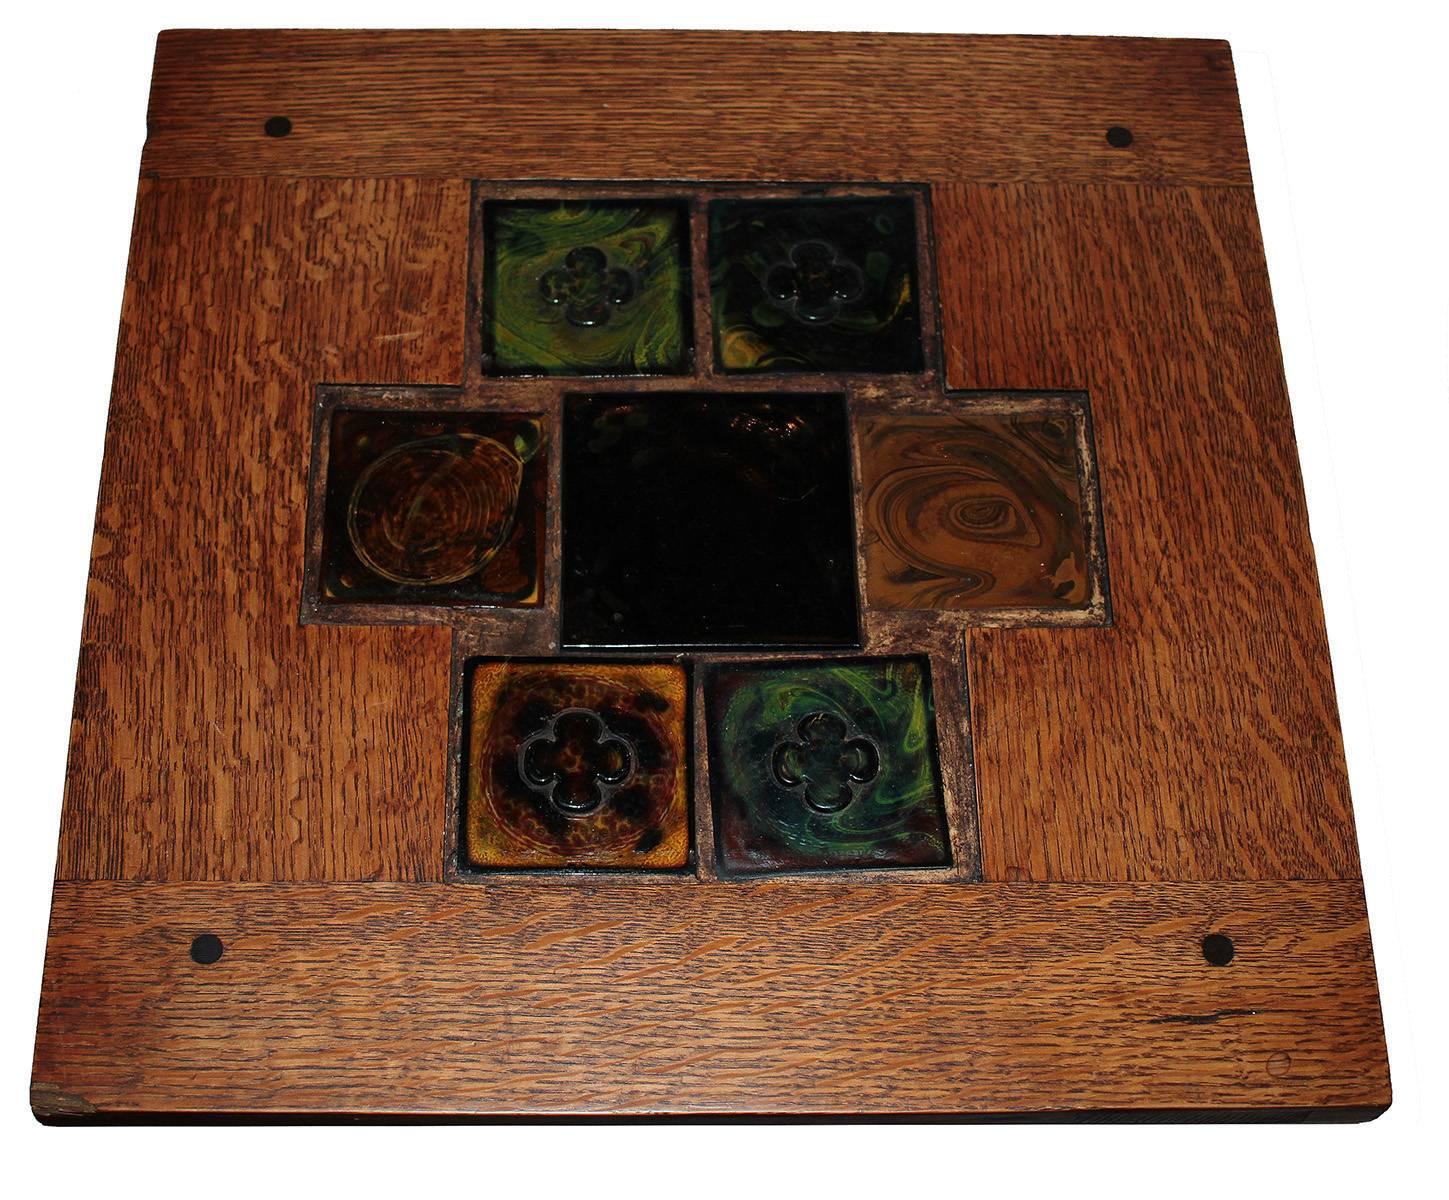 A beautiful oak mission end table with handmade inset tiles. This is an original unsigned piece that has all the hallmarks of Classic American Arts and crafts movement. Solid quarter saw oak with a perfect patina. There are four colorful inset tiles